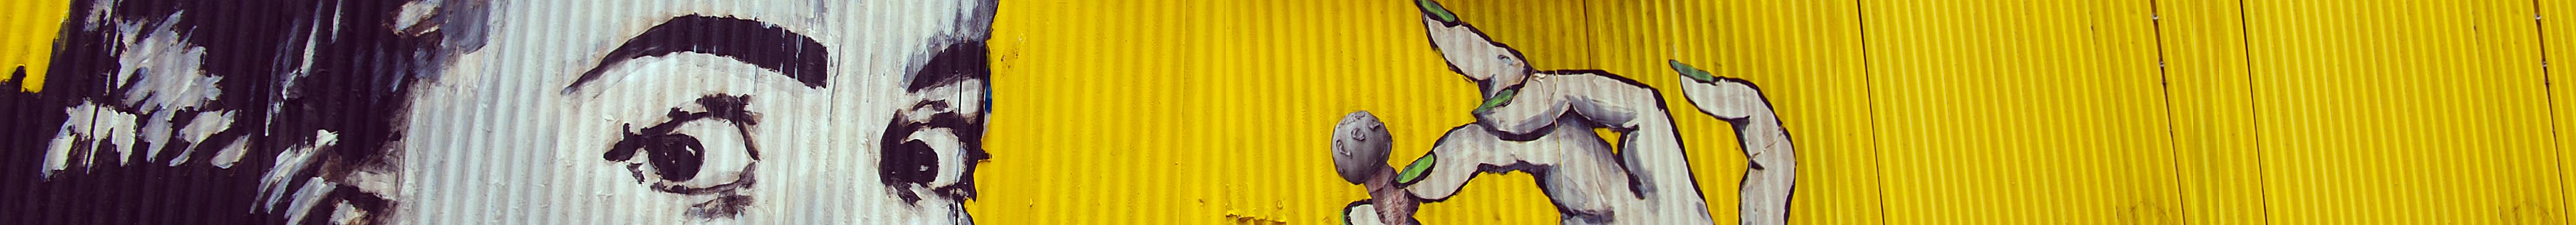 Woman, painted on yellow metal sheets in Valparaiso, Chile - Banner